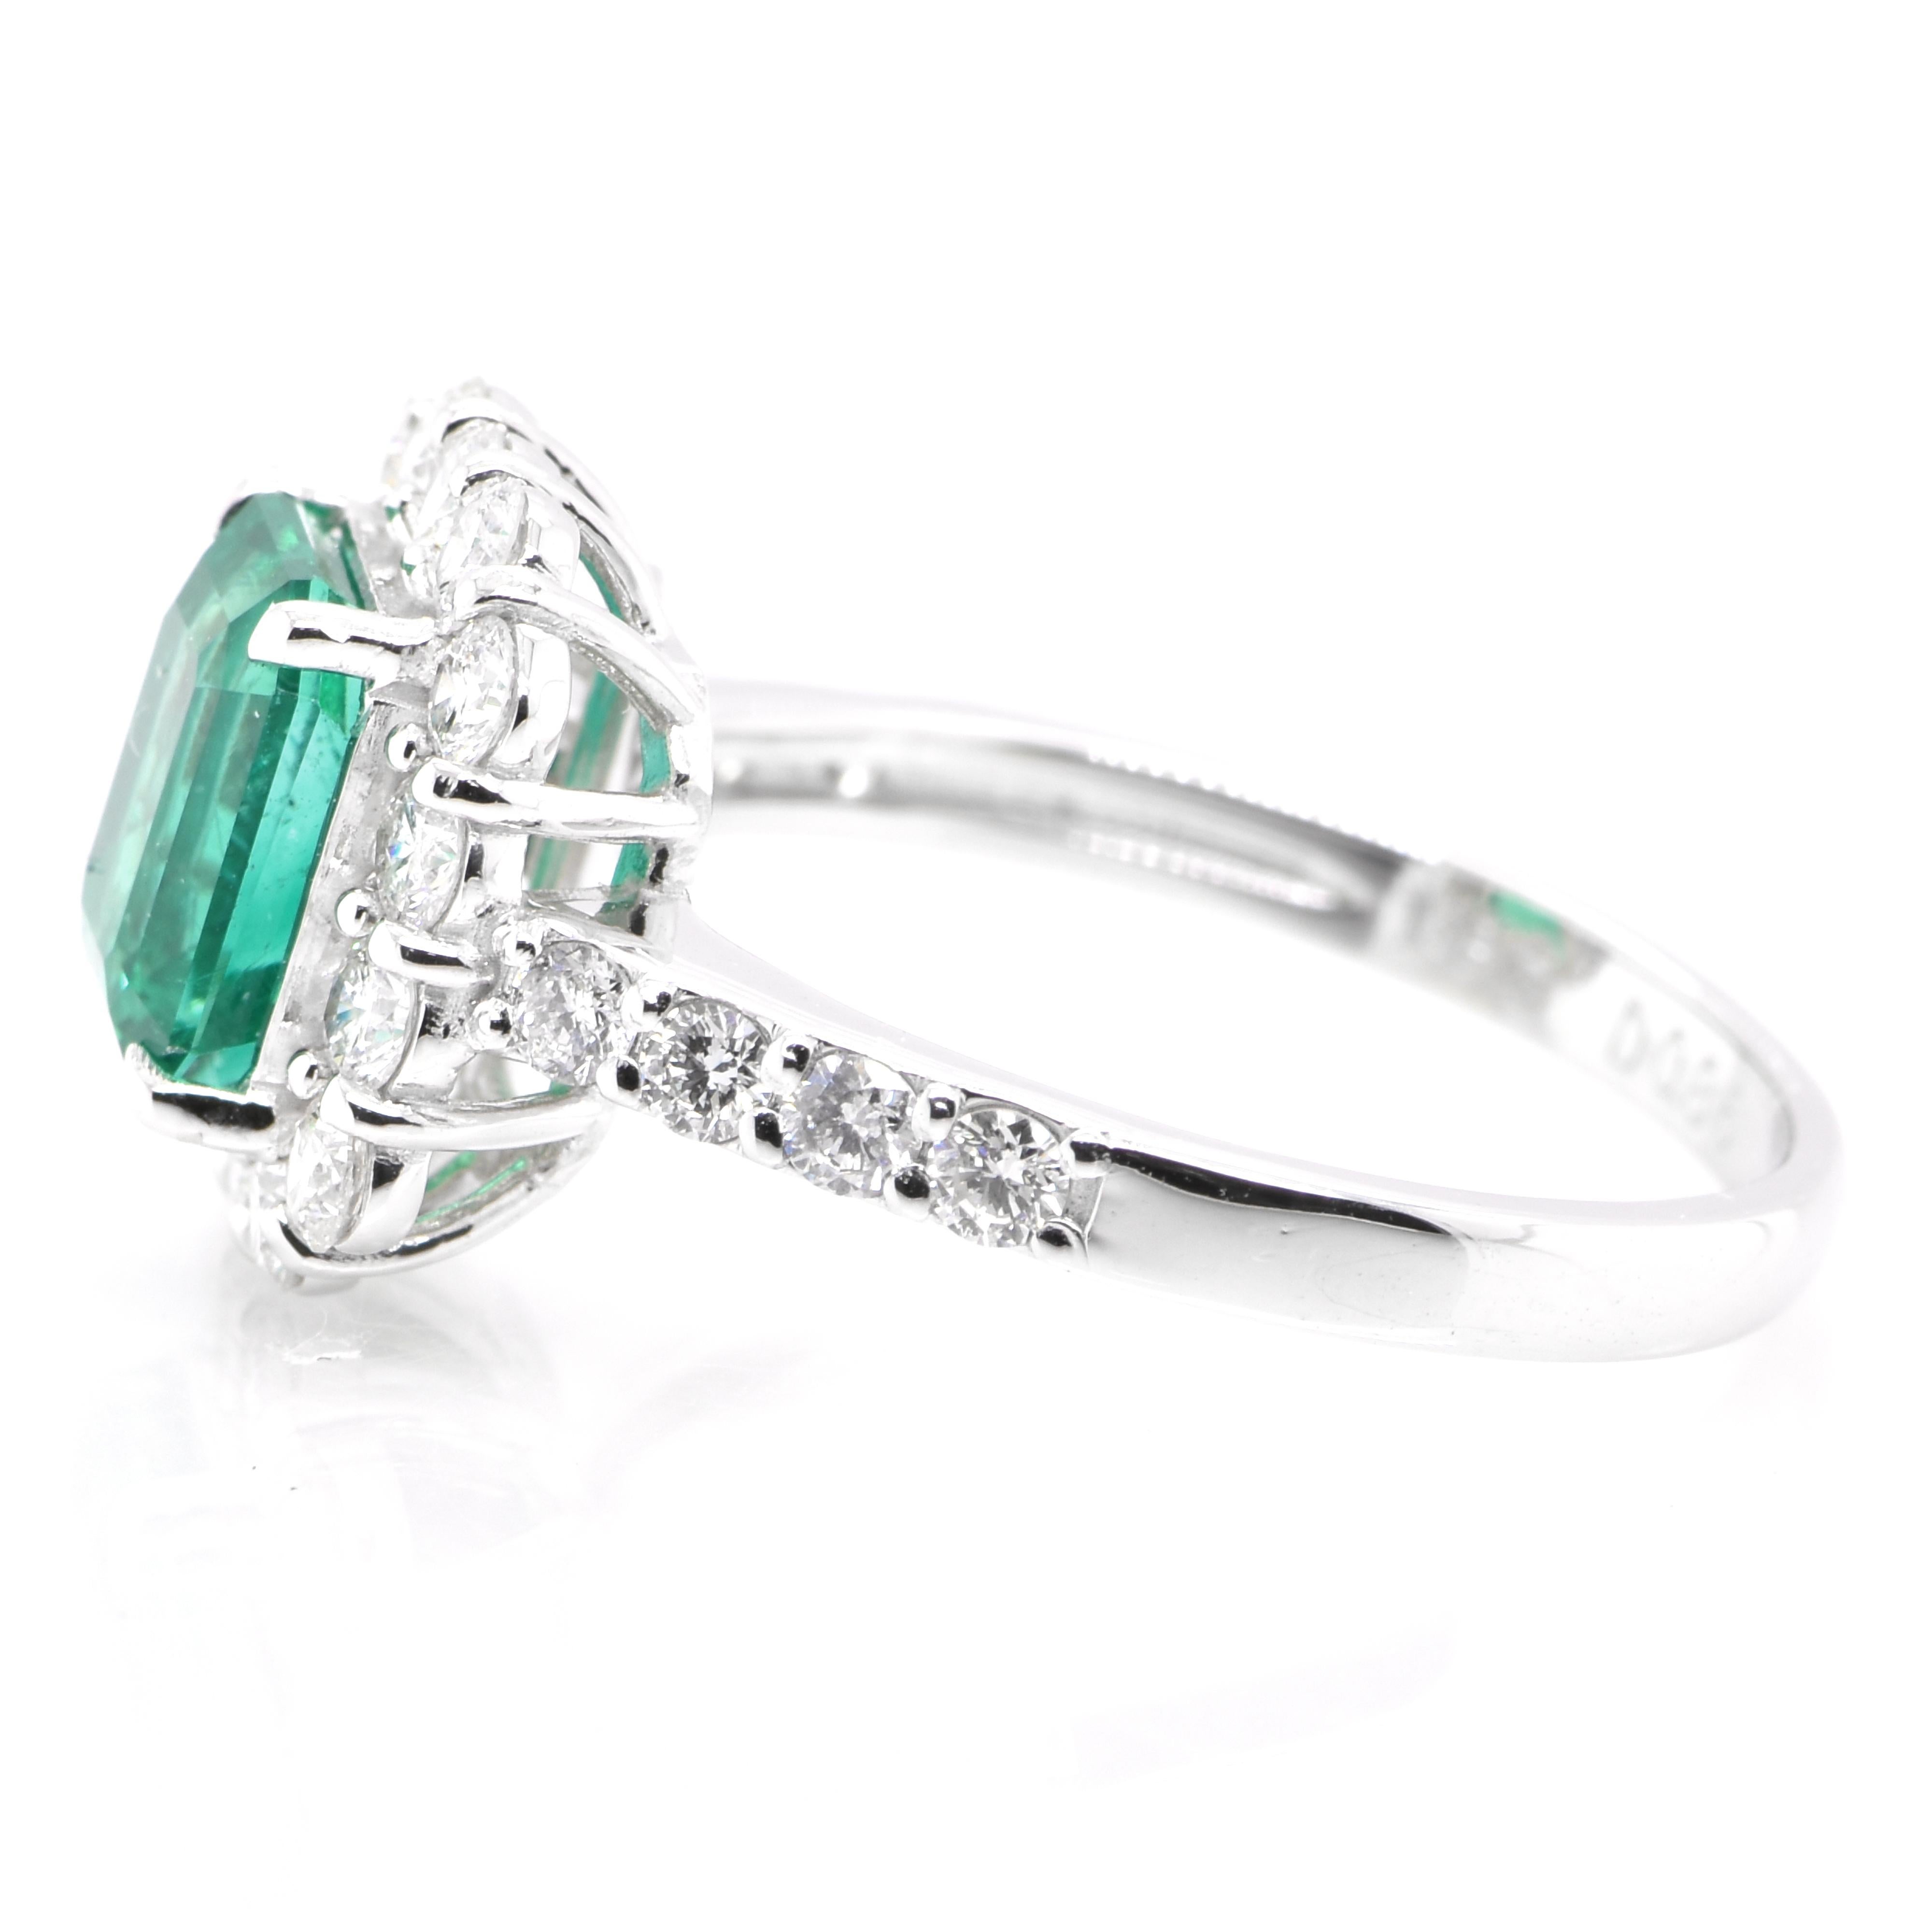 Emerald Cut GIA Certified 1.82 Carat Natural Colombian Emerald Ring Set in Platinum For Sale